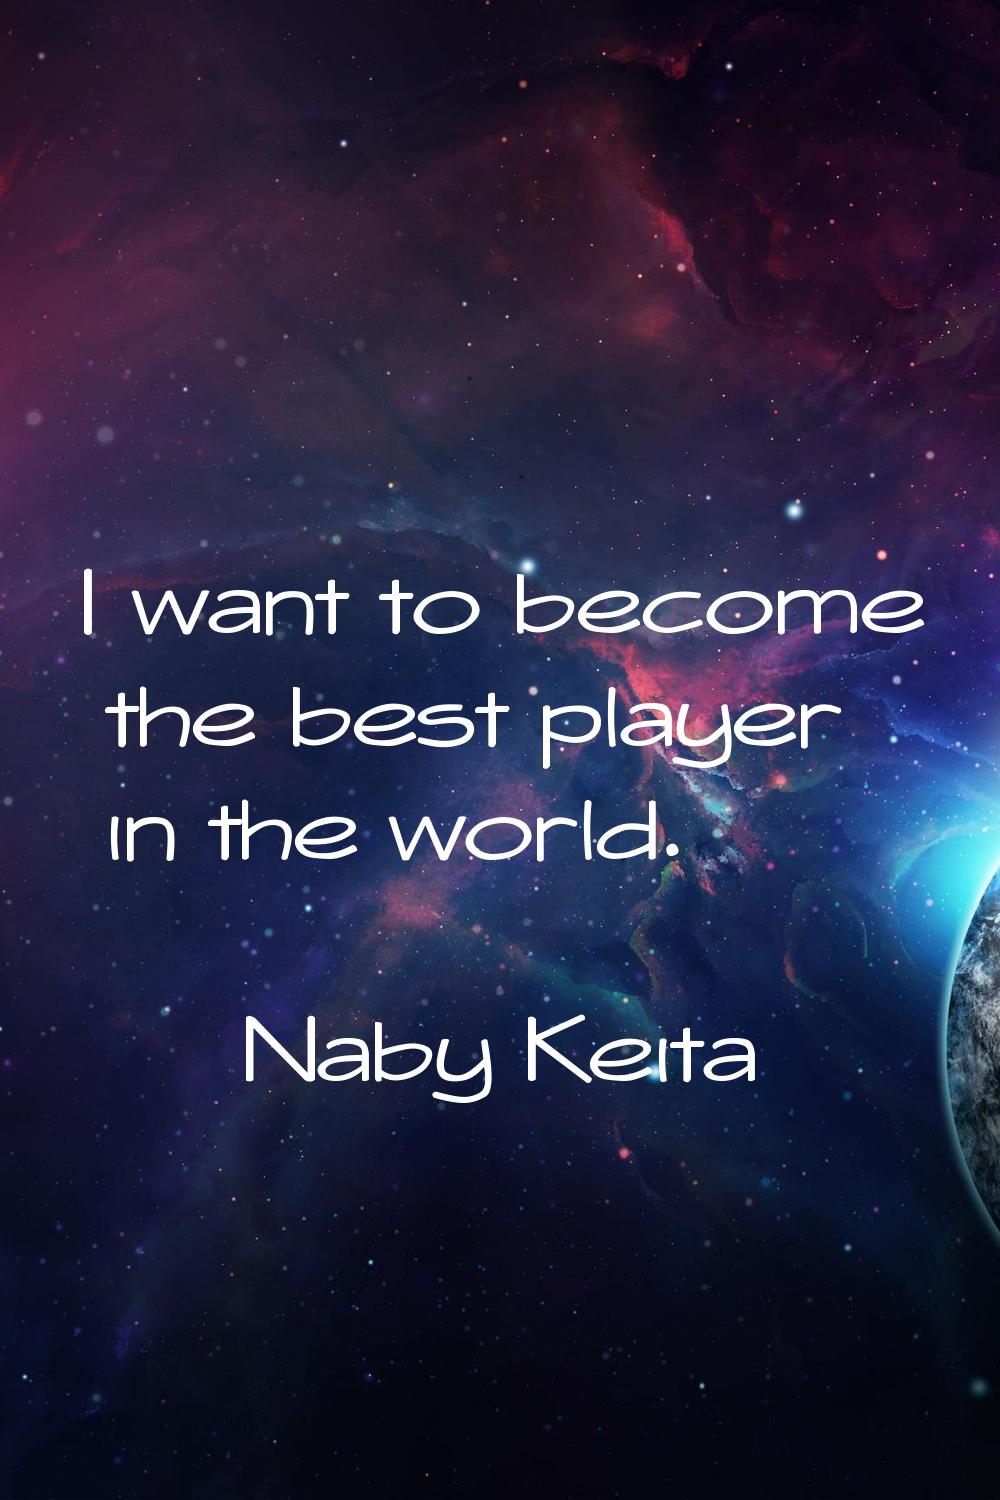 I want to become the best player in the world.